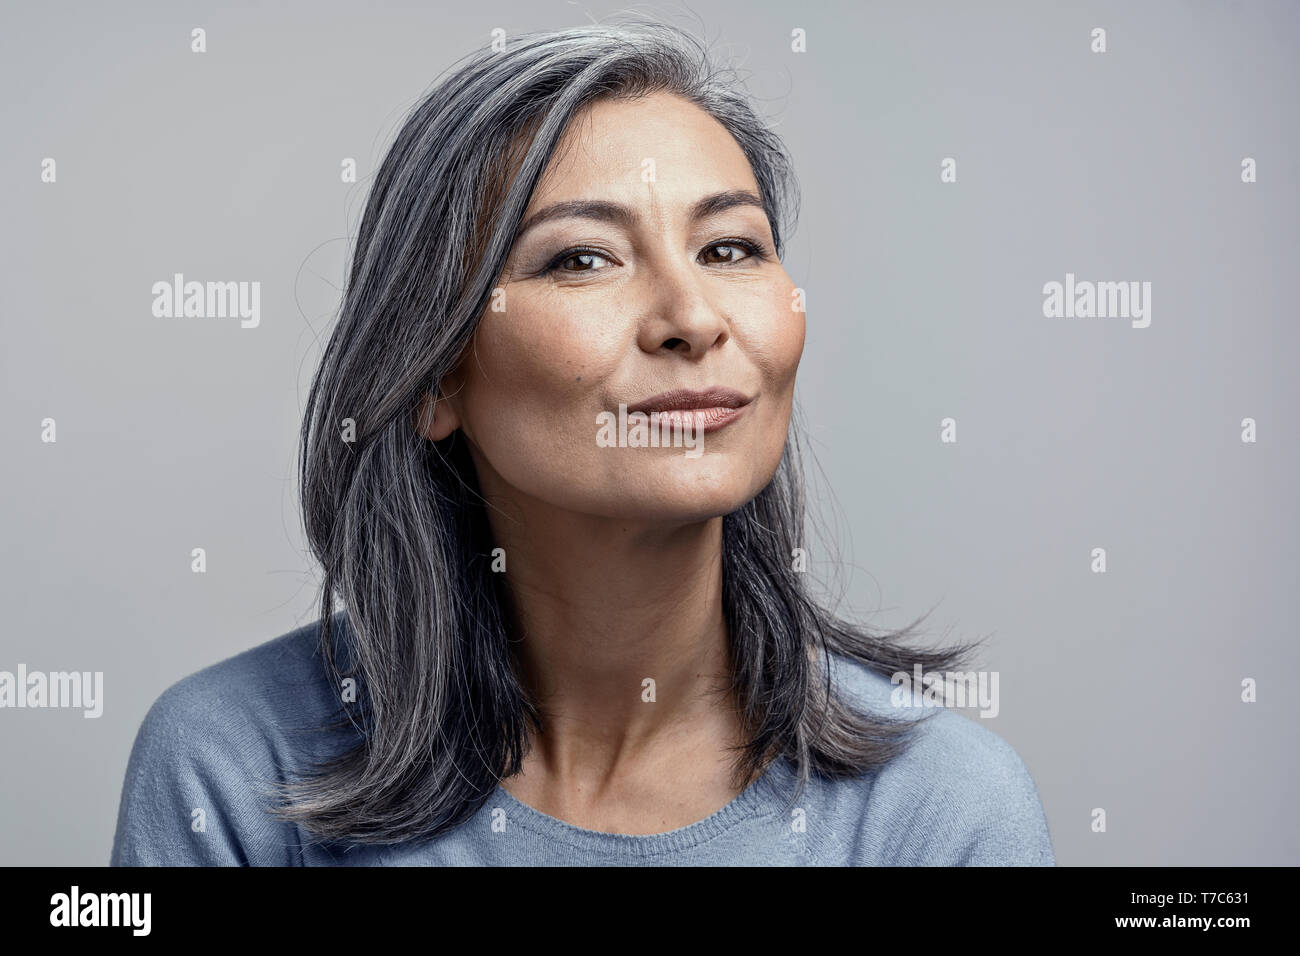 Gorgeous Atrractive Korean Woman with Gray Wavy Hair and Cheekbones Smiles Gently to Camera. Closed-Up Tilted Head and Shoulders Toned Studio Portrait Stock Photo